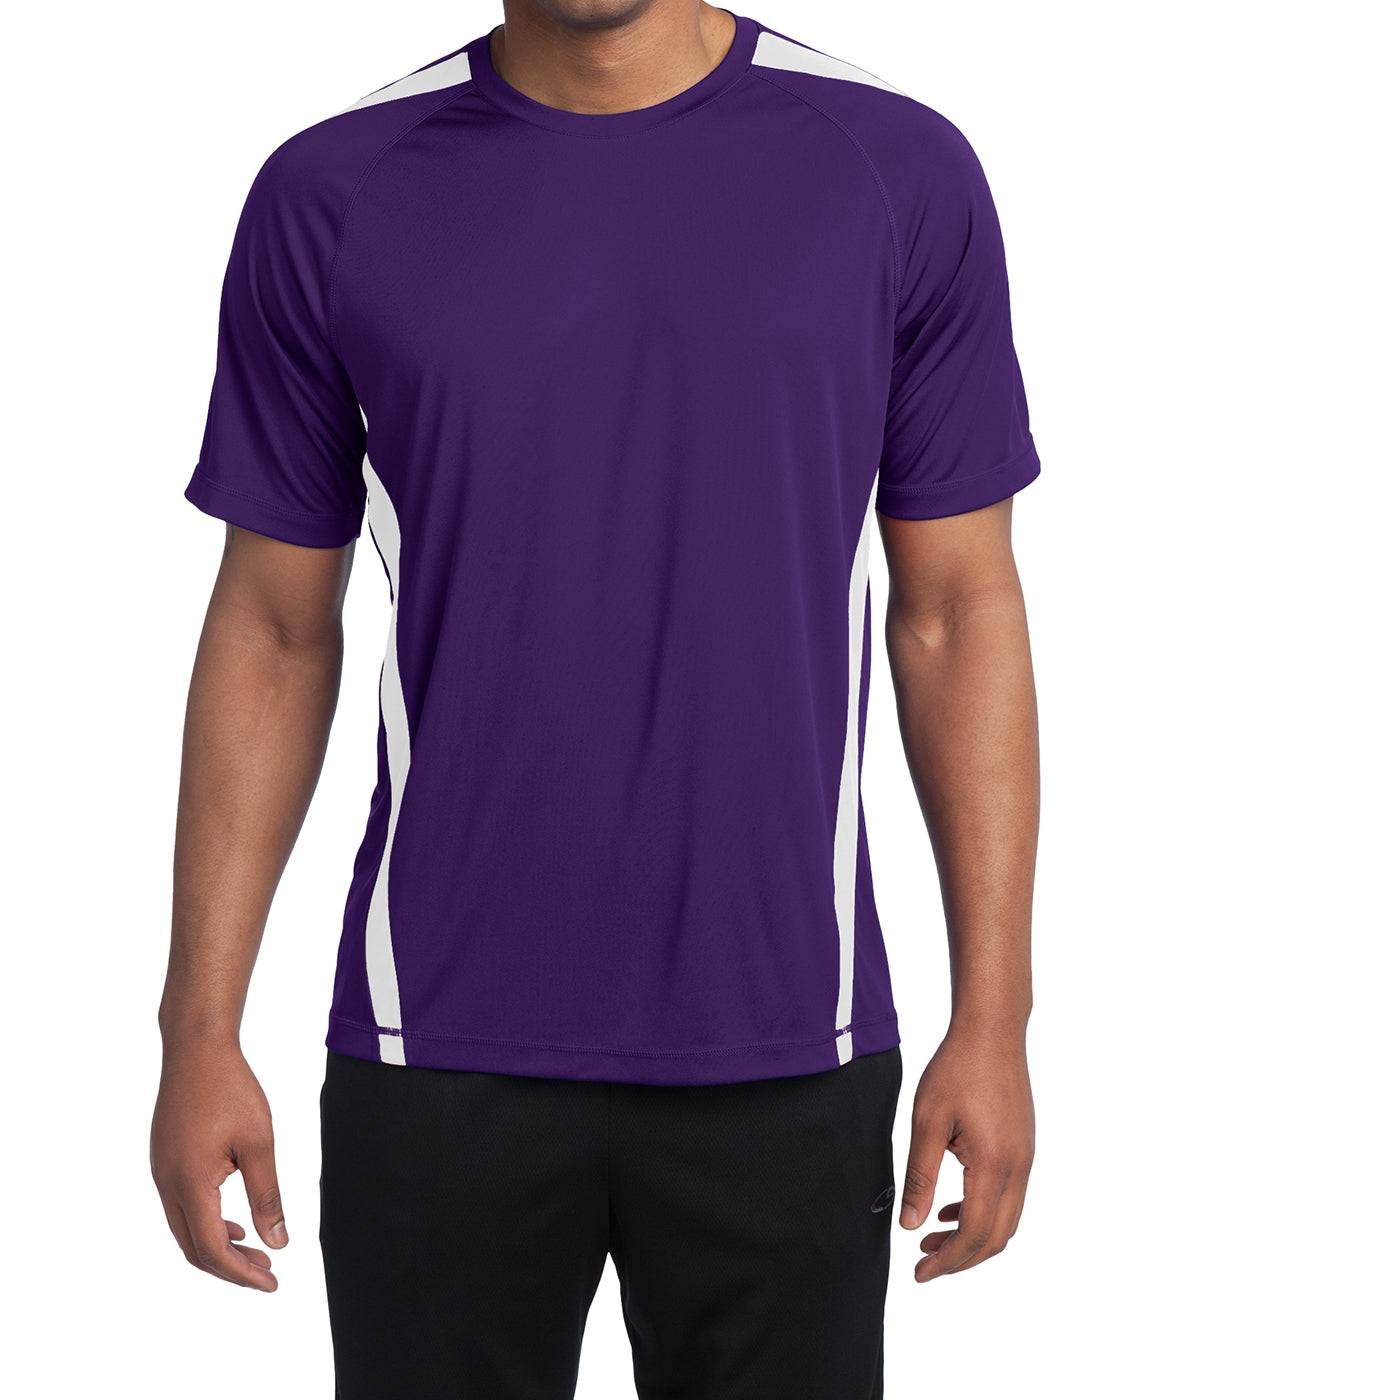 Men's Colorblock PosiCharge Competitor Tee - Purple/ White